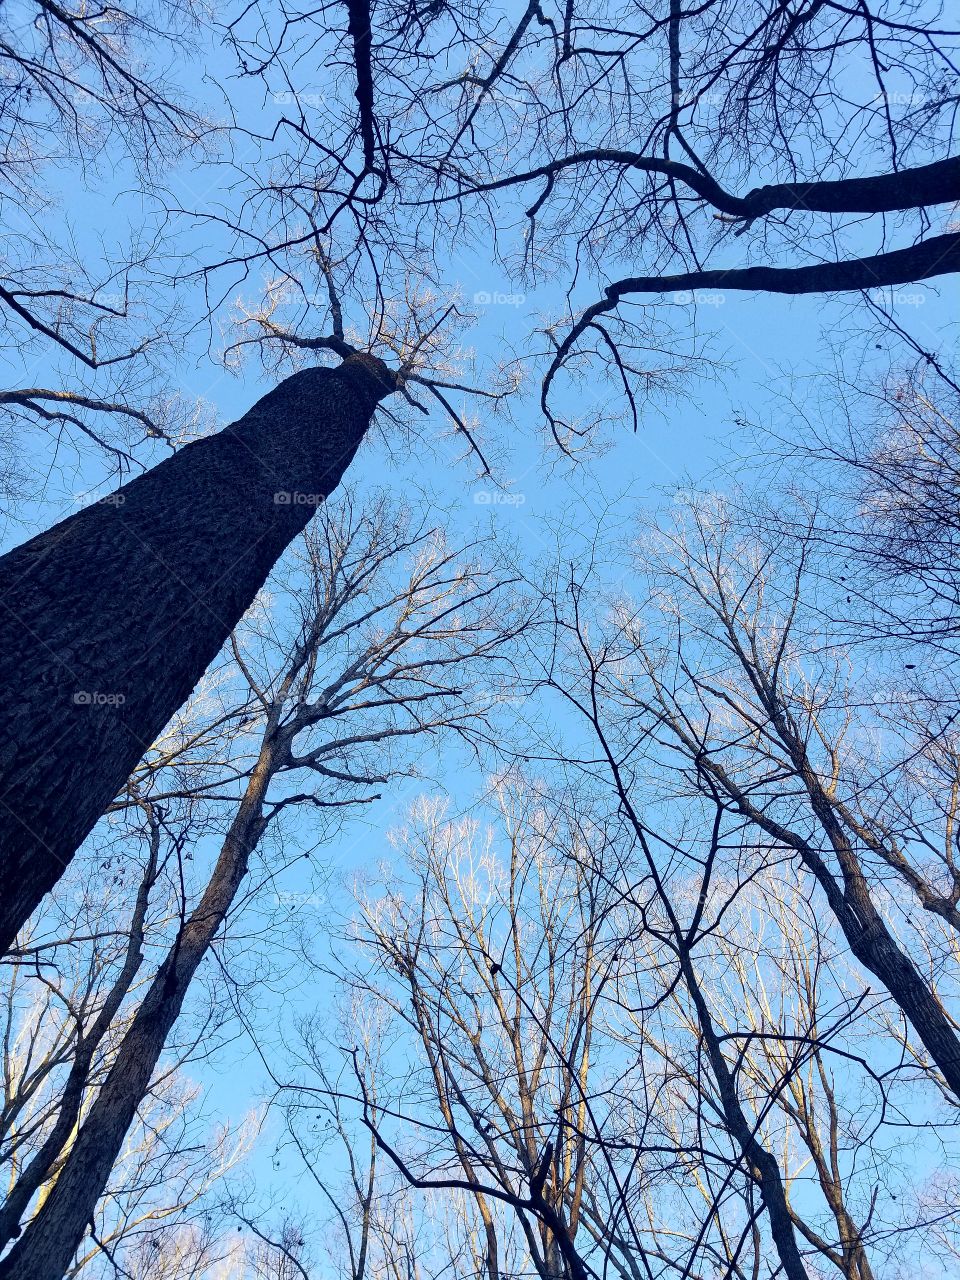 Looking up at the sky through the leaf-less trees.